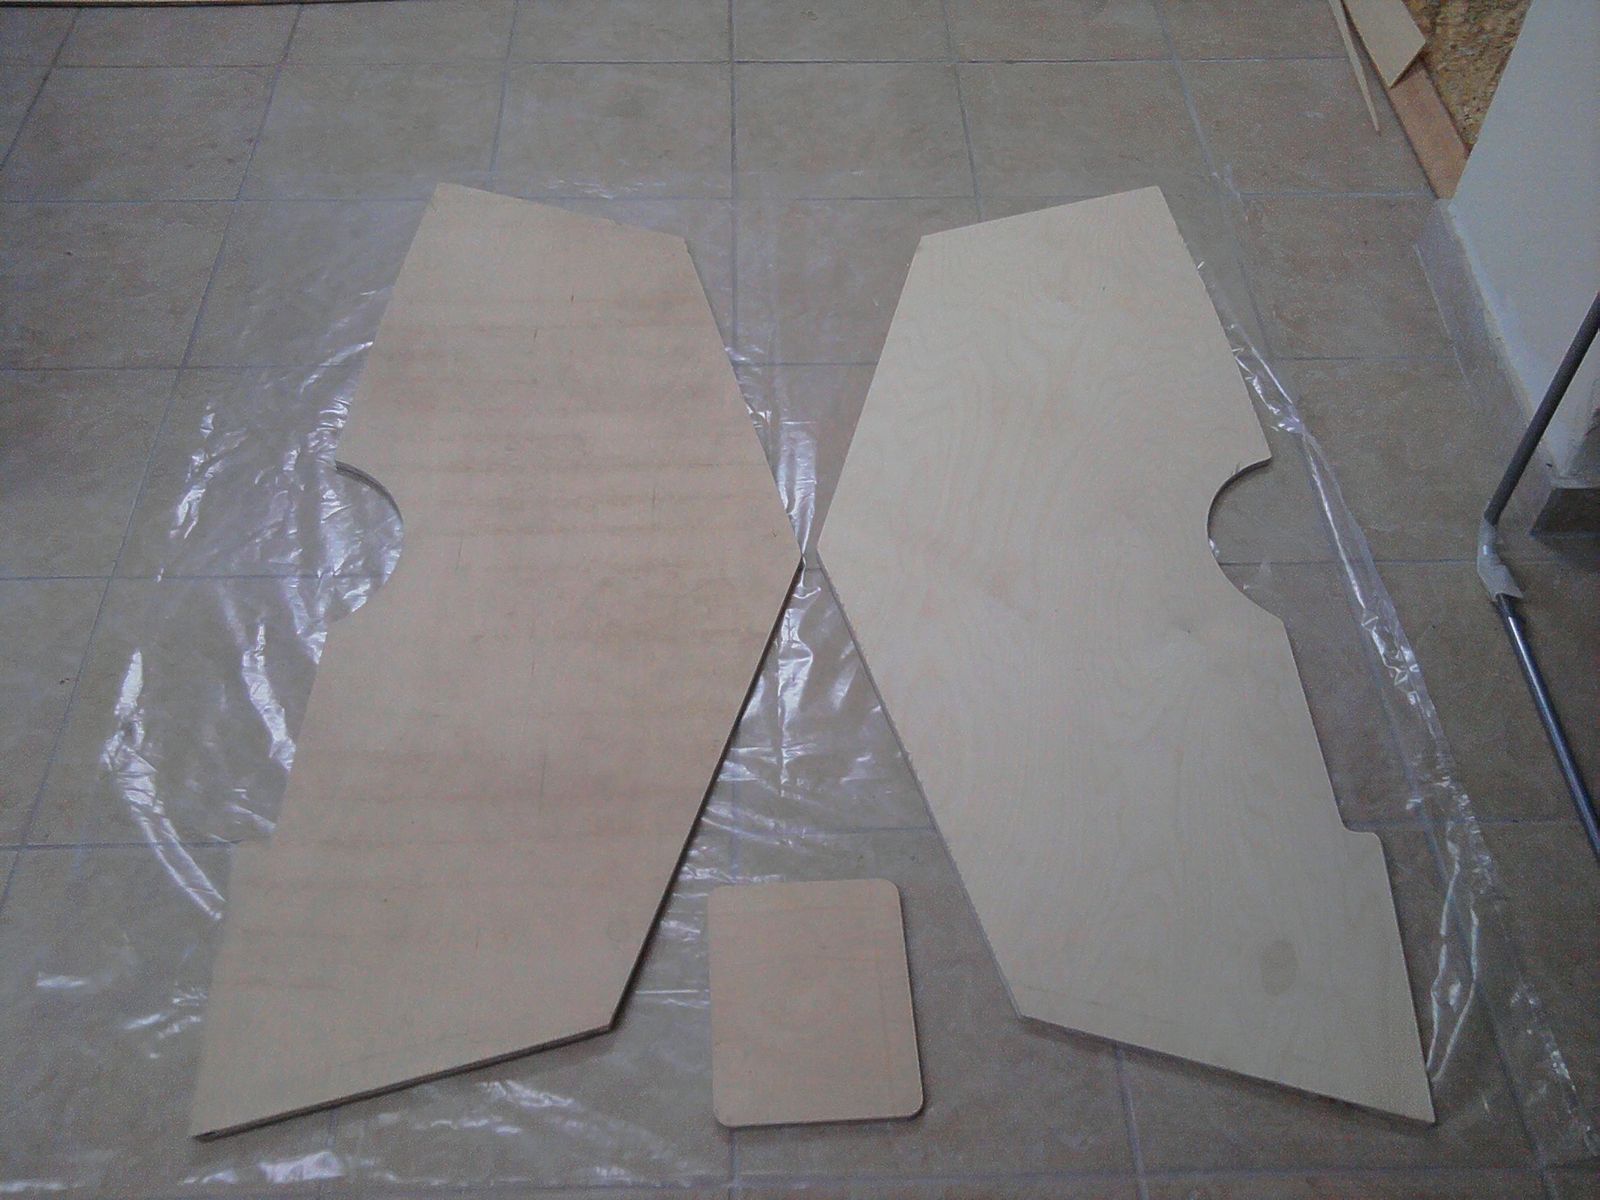 Two transoms laminated together to make one

